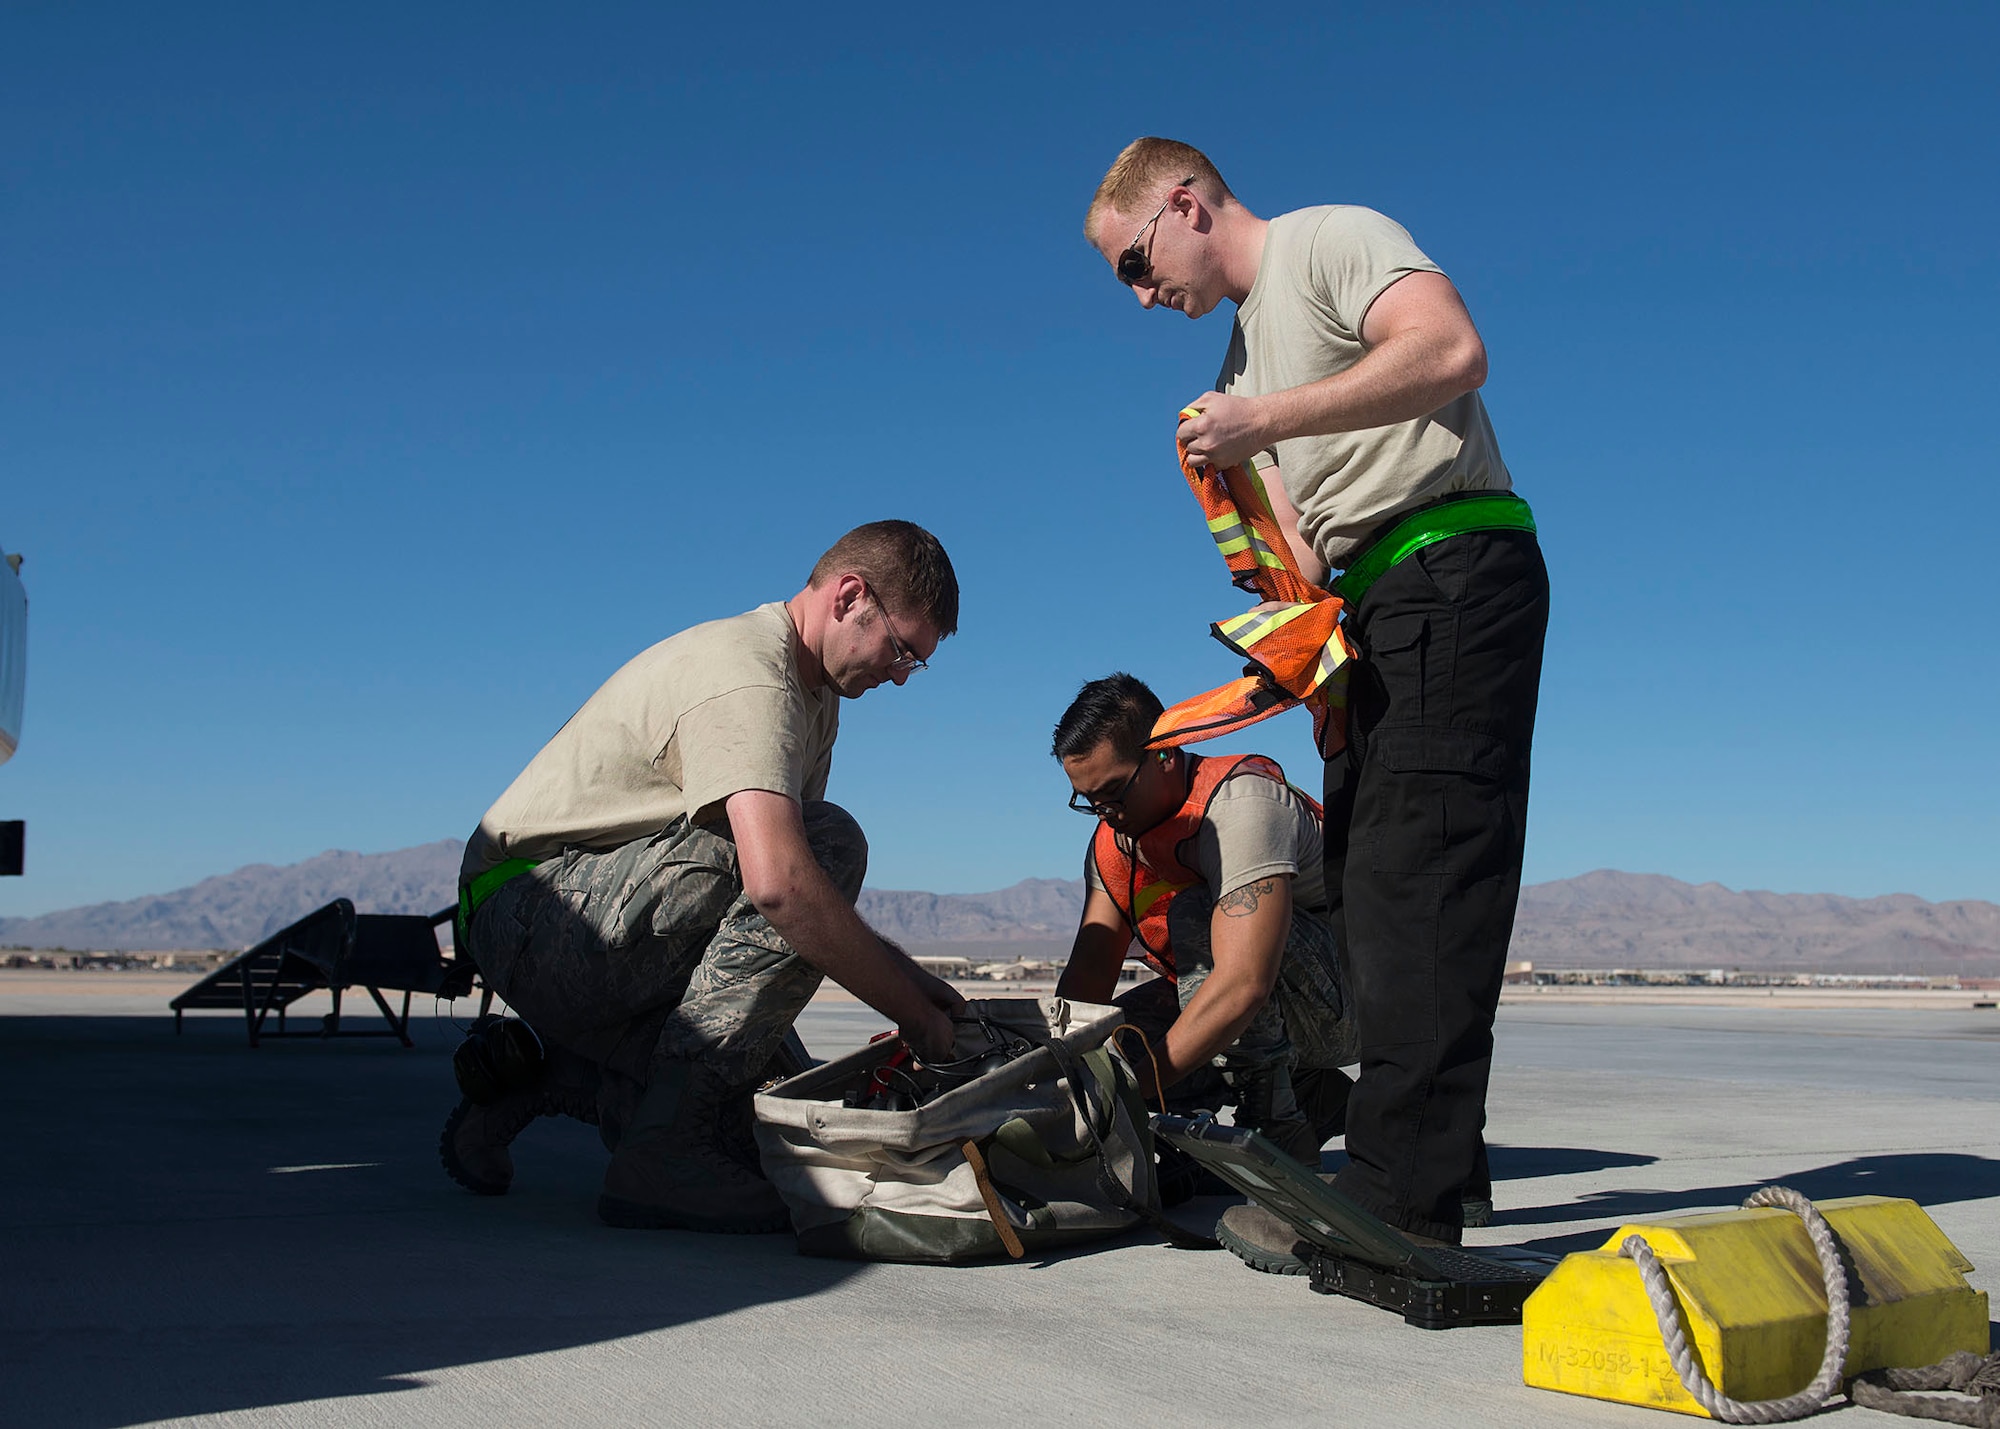 Staff Sgts. James Smith and Guy Hinton, 57th Aircraft Maintenance Squadron Raptor Aircraft Maintenance Unit dedicated crew chiefs, and Senior Airman Johnny Cruz, 57th AMXS Raptor AMU assistant DCC, prepared their gear on the flightline at Nellis Air Force Base, Nevada, Nov. 7, 2018. They performed a hot-pit refueling where an aircraft is refueled while still running to get the fighter jet back to the mission faster. (U.S. Air Force photo by Airman 1st Class Bryan T. Guthrie)